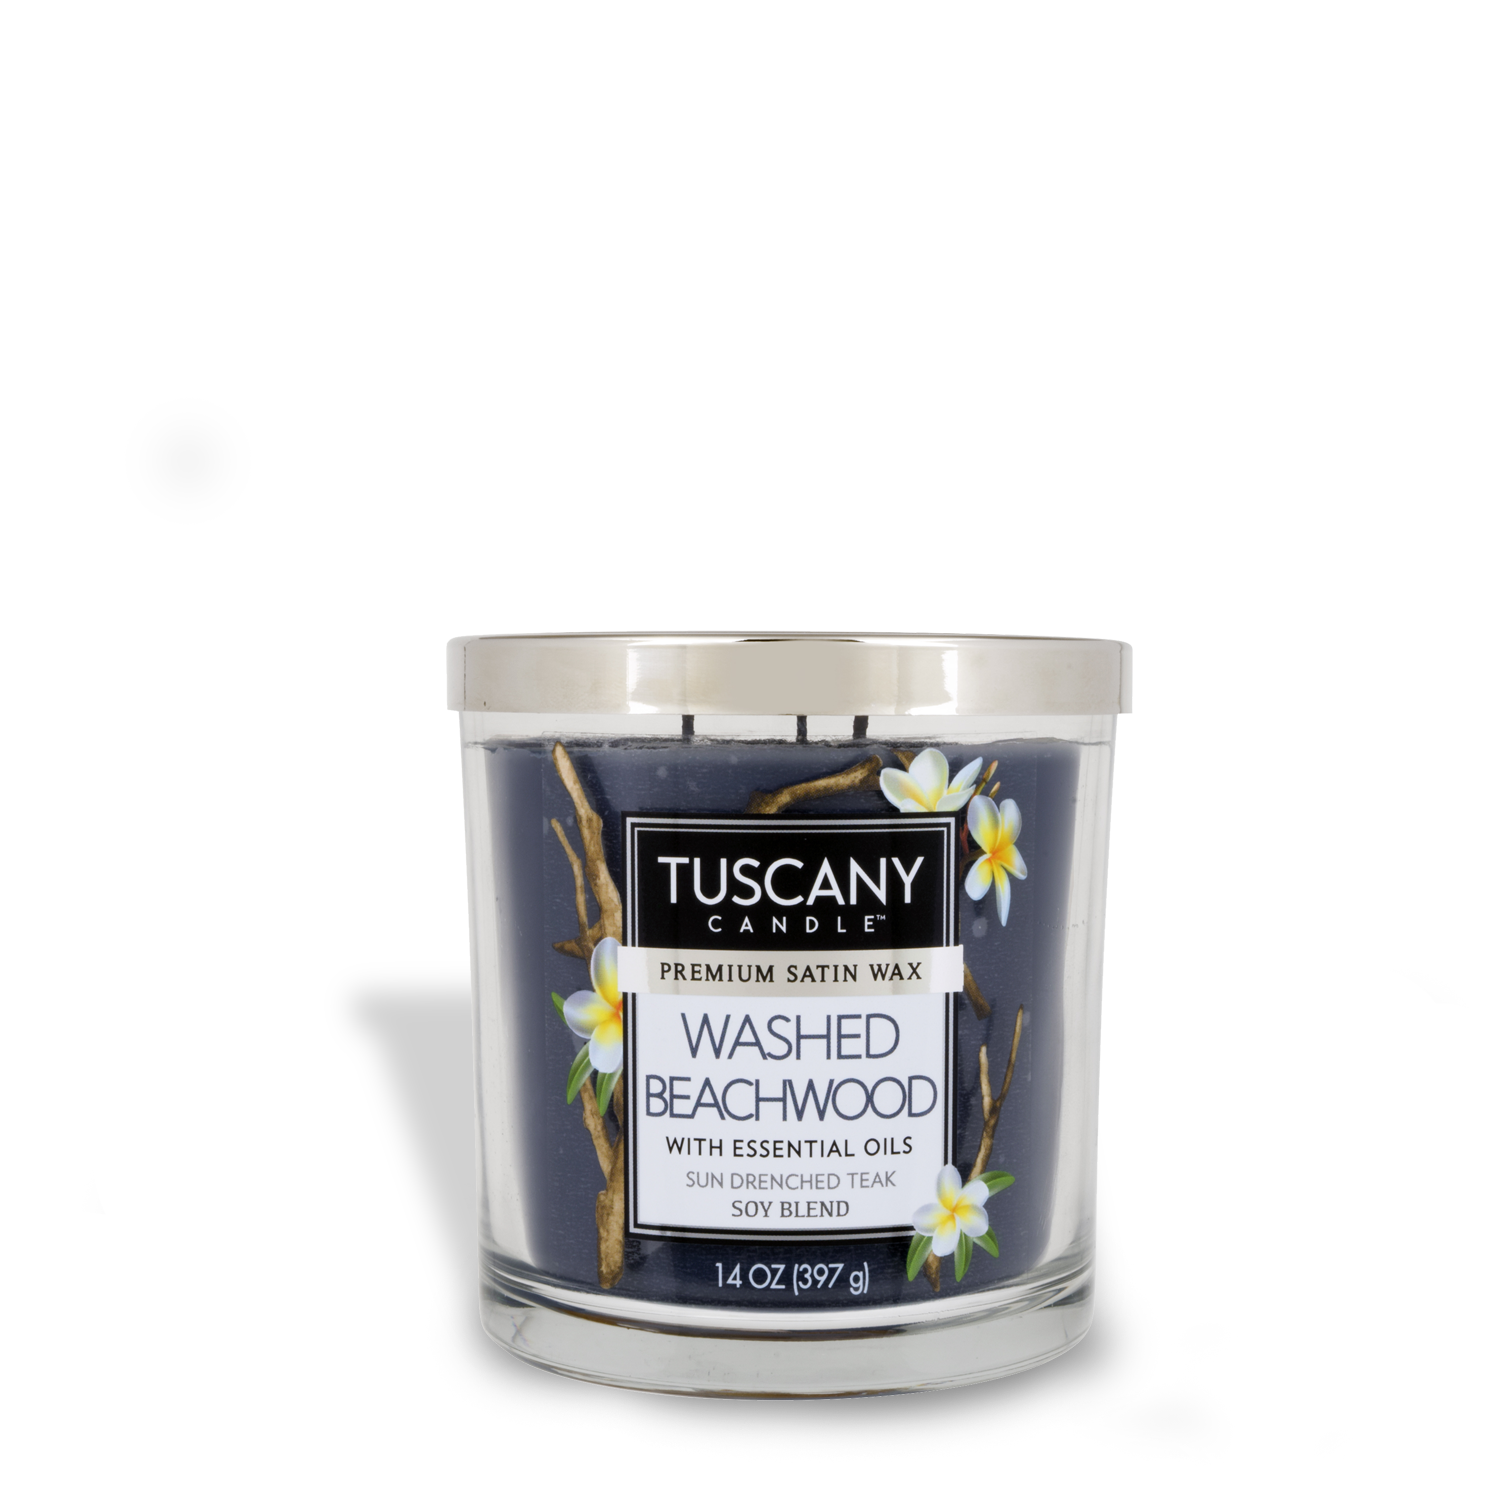 Tuscany Candle Premium Satin Wax Candle, Soy Blend, Vanilla Bean - 1 candle, 14 oz